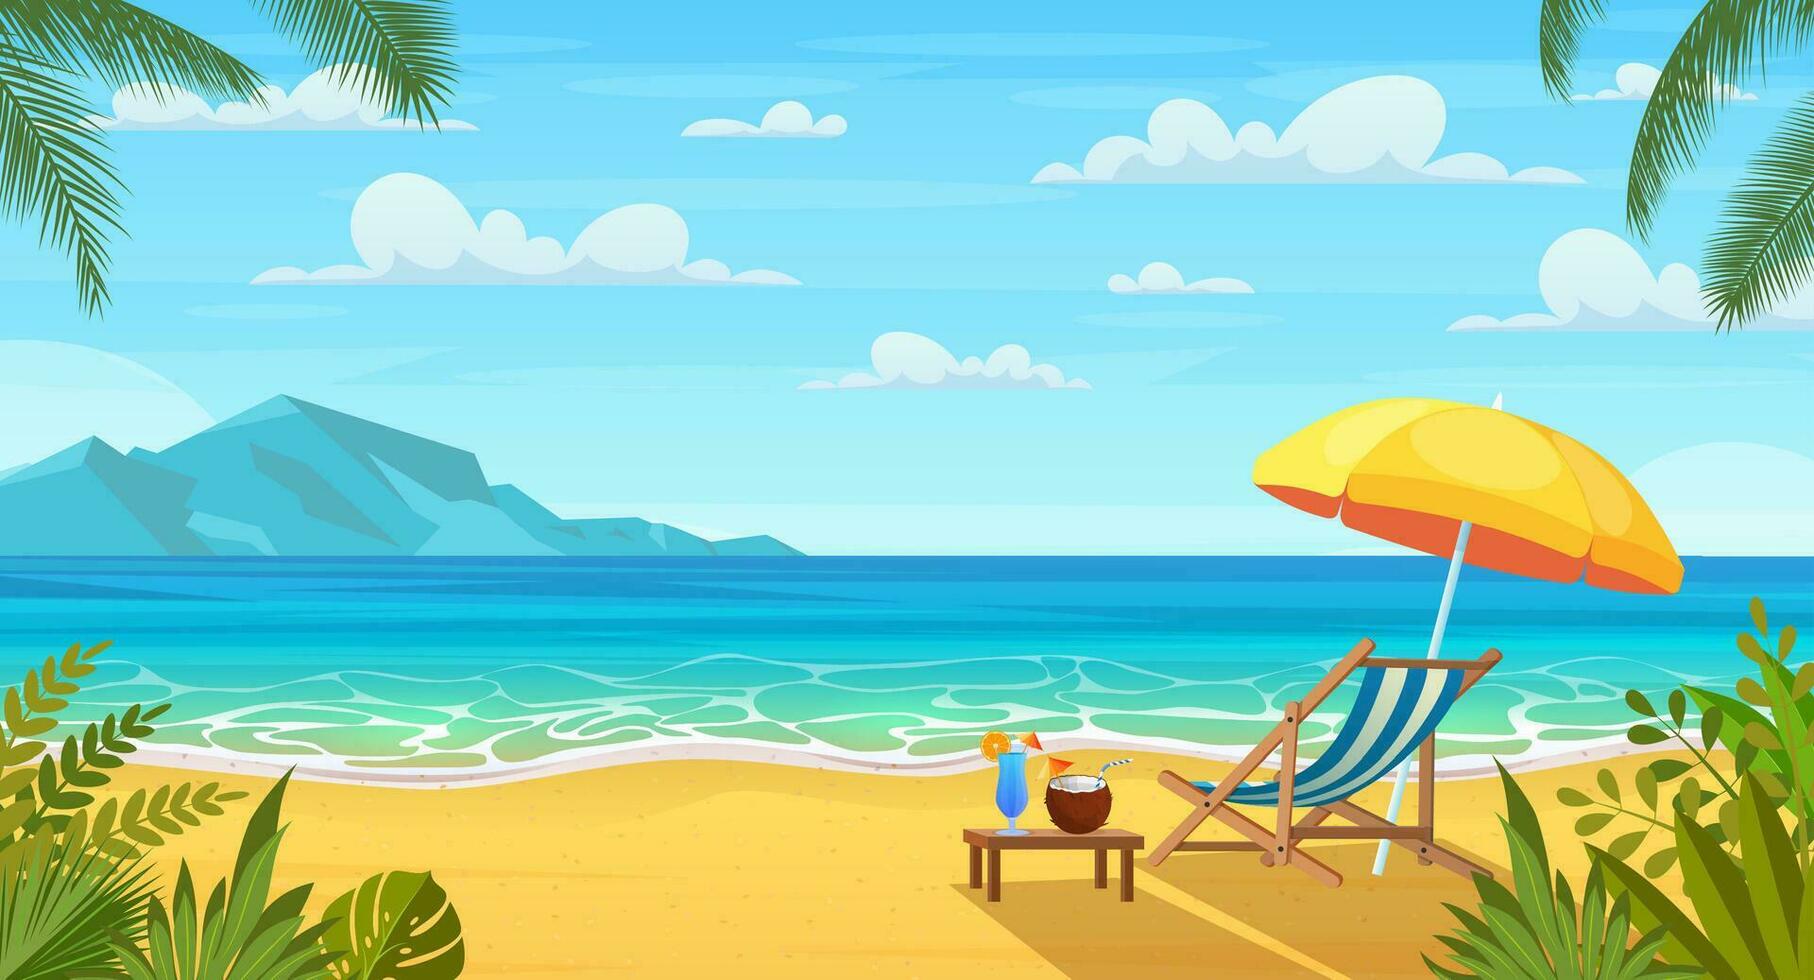 Landscape of wooden chaise lounge, umbrella, table with coconut and cocktail on beach, mountains . Seaside landscape, nature vacation, ocean or sea seashore. Vector illustration in flat style